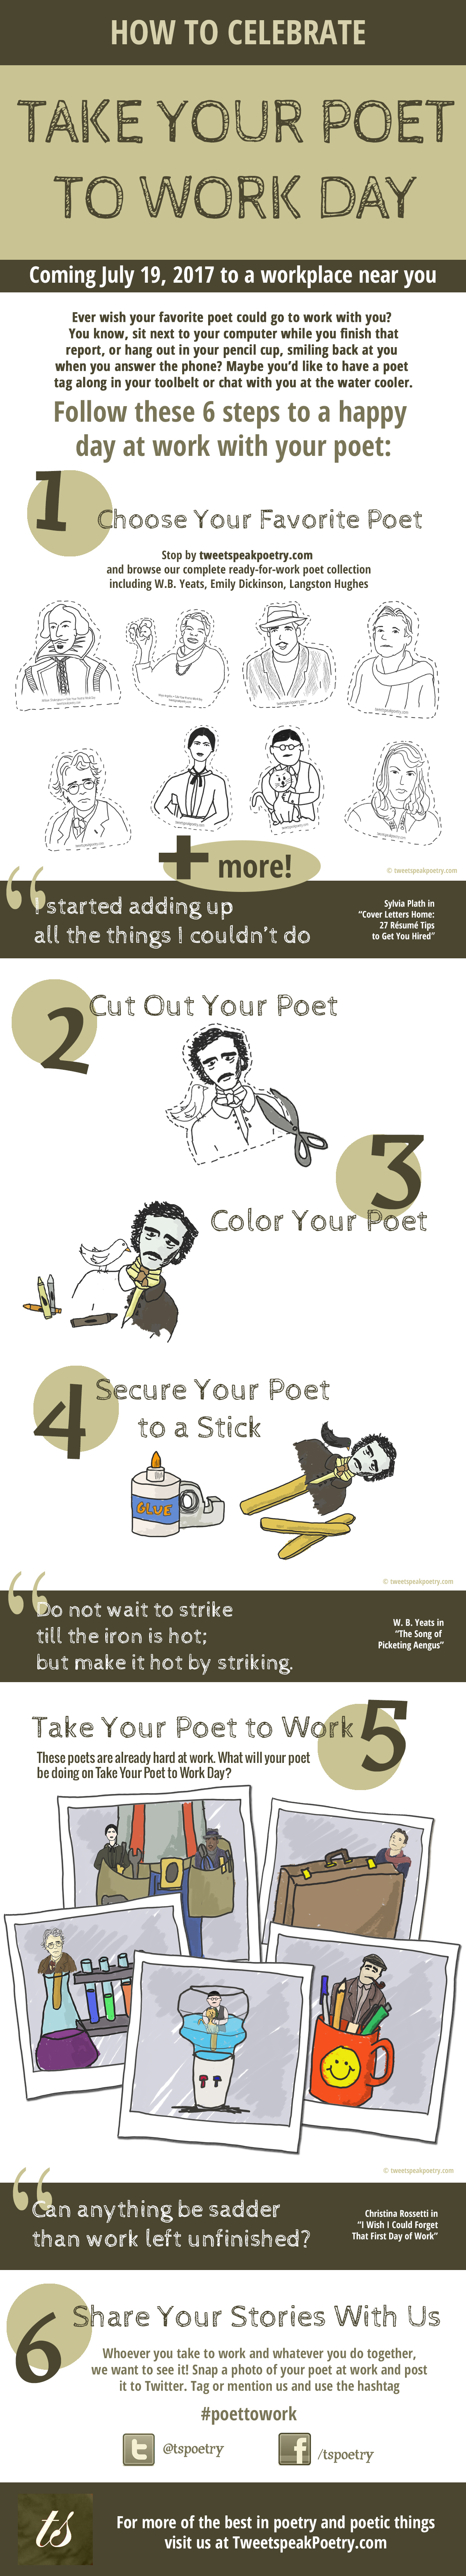 Take Your Poet to Work Day 2017 Infographic